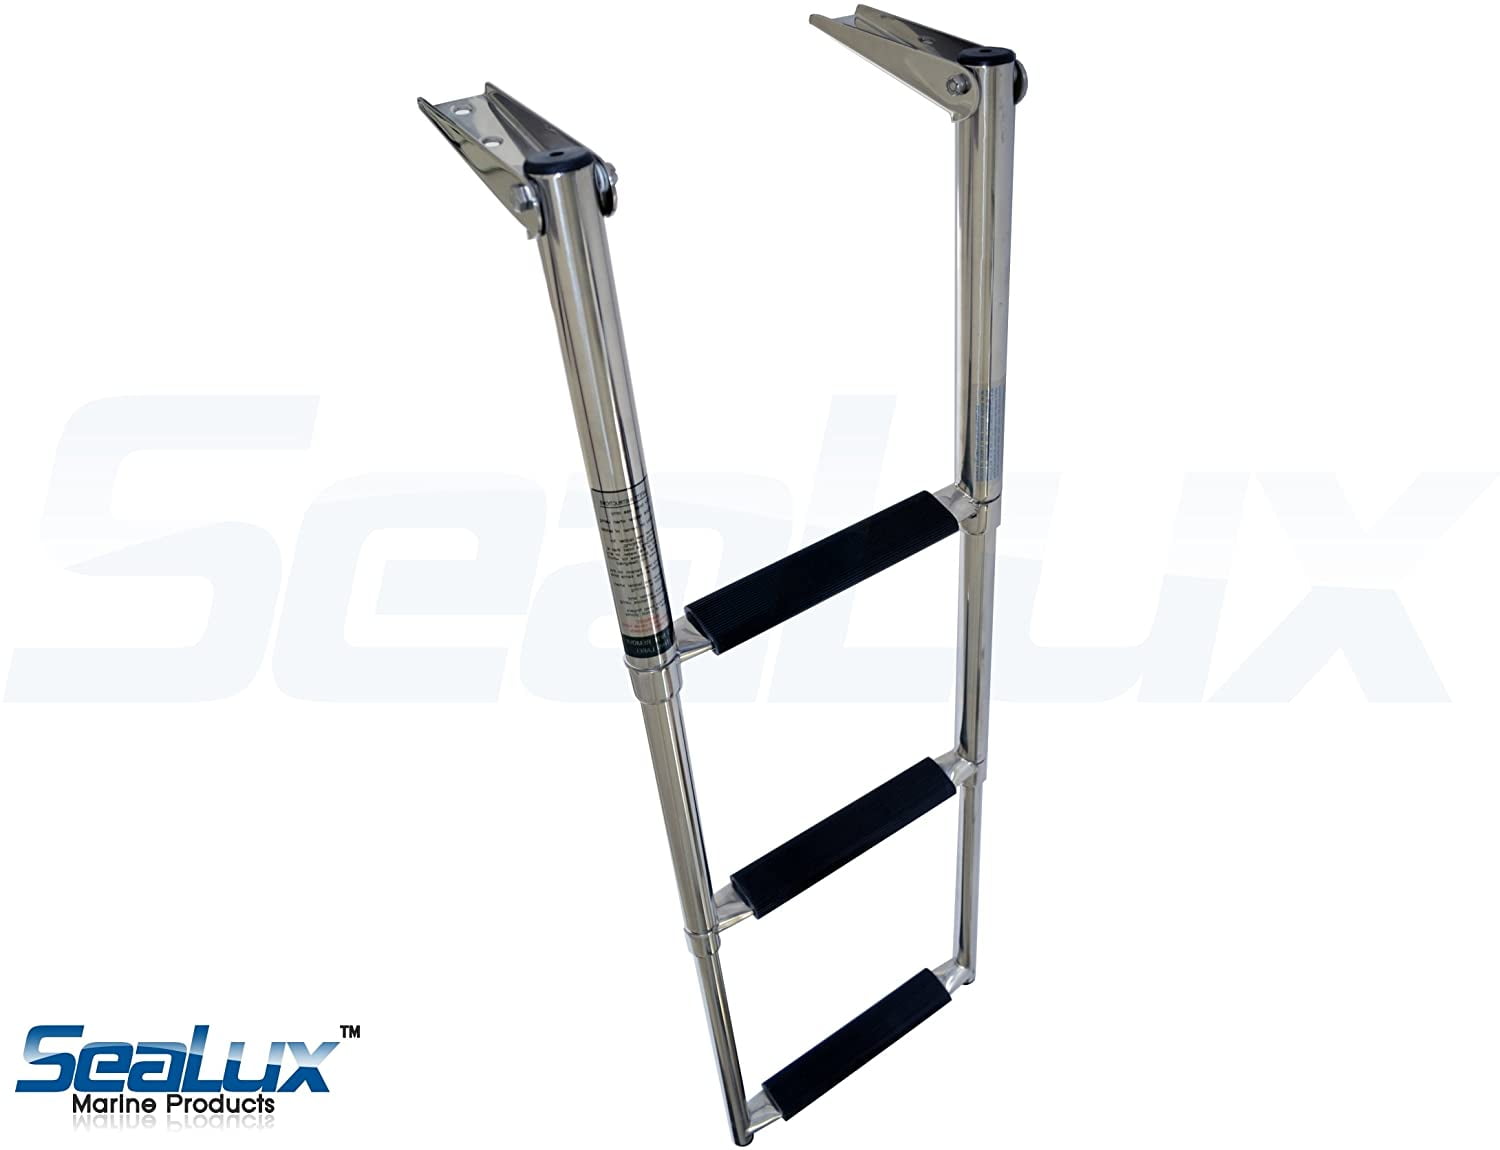 SeaLux Marine Deluxe Extra Drop Down 3-Step Slide Under Platform Mount Boarding Ladder with Retaining Strap OEM quality